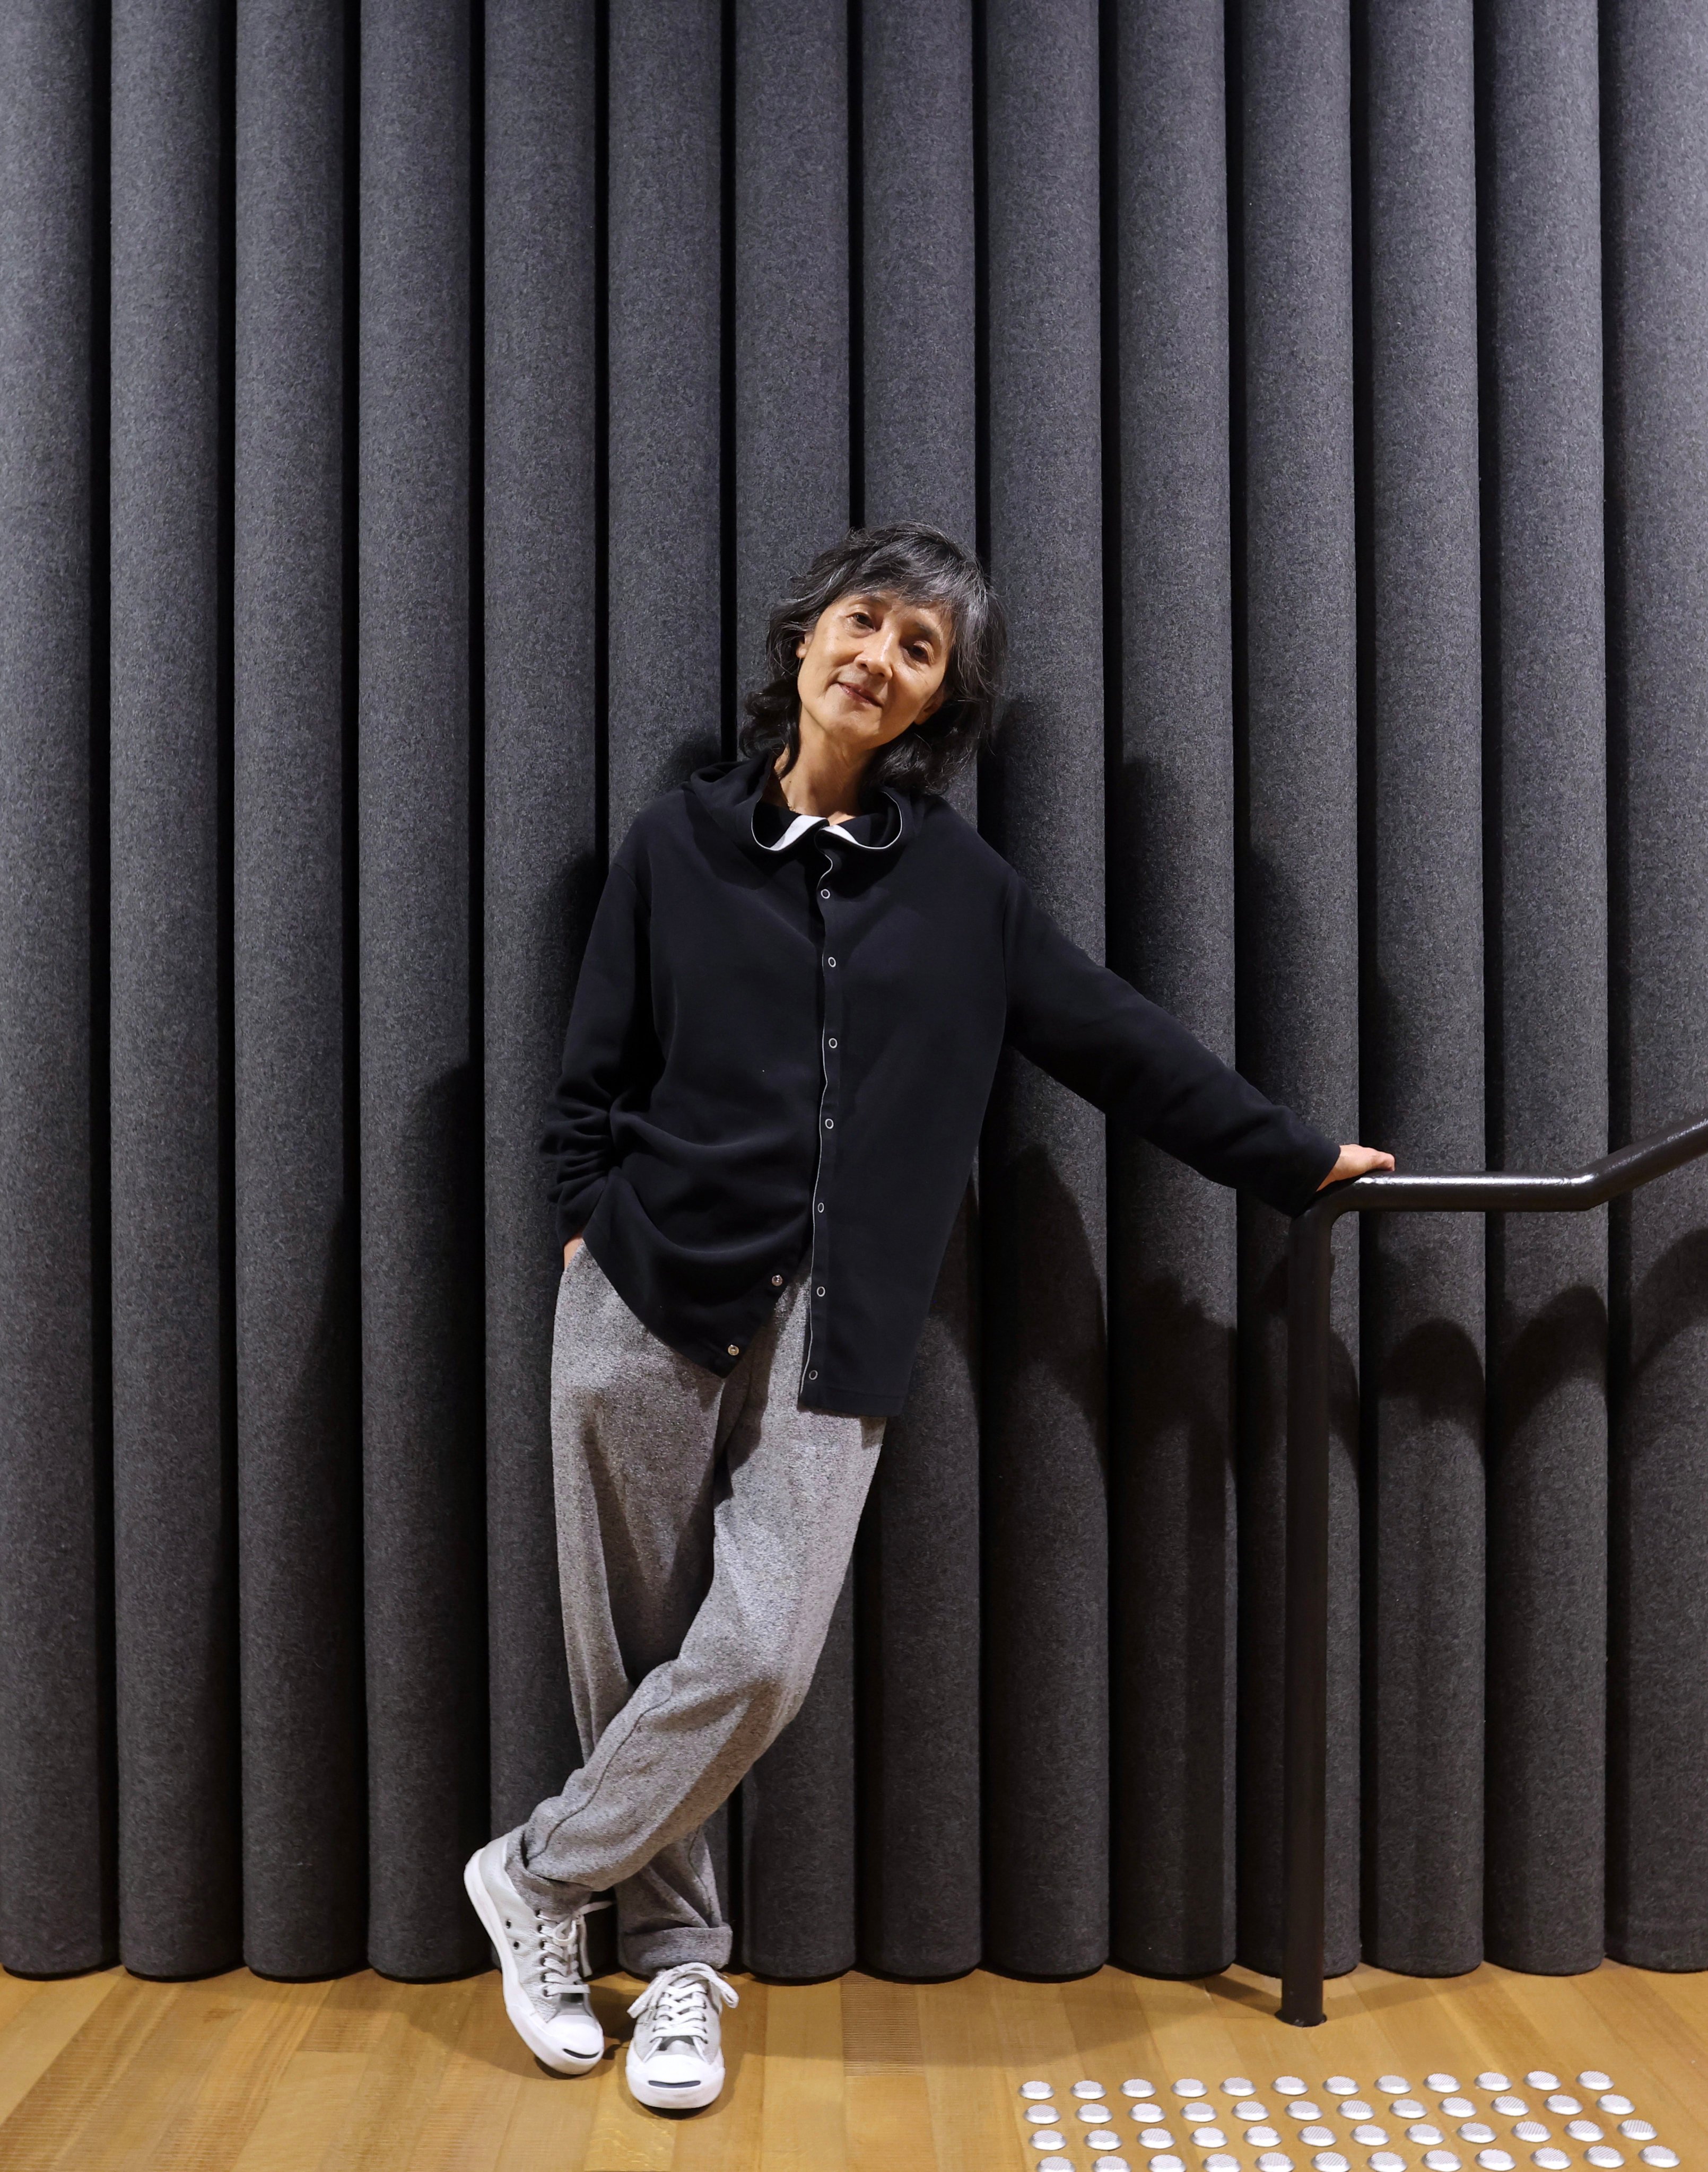 Film director Clara Law Cheuk-yiu at M+ Cinema in West Kowloon, where a restored print of her debut feature film is screening. Born in Macau and long based in Australia, she tells the Post why Hong Kong never felt like home. Photo: Jonathan Wong